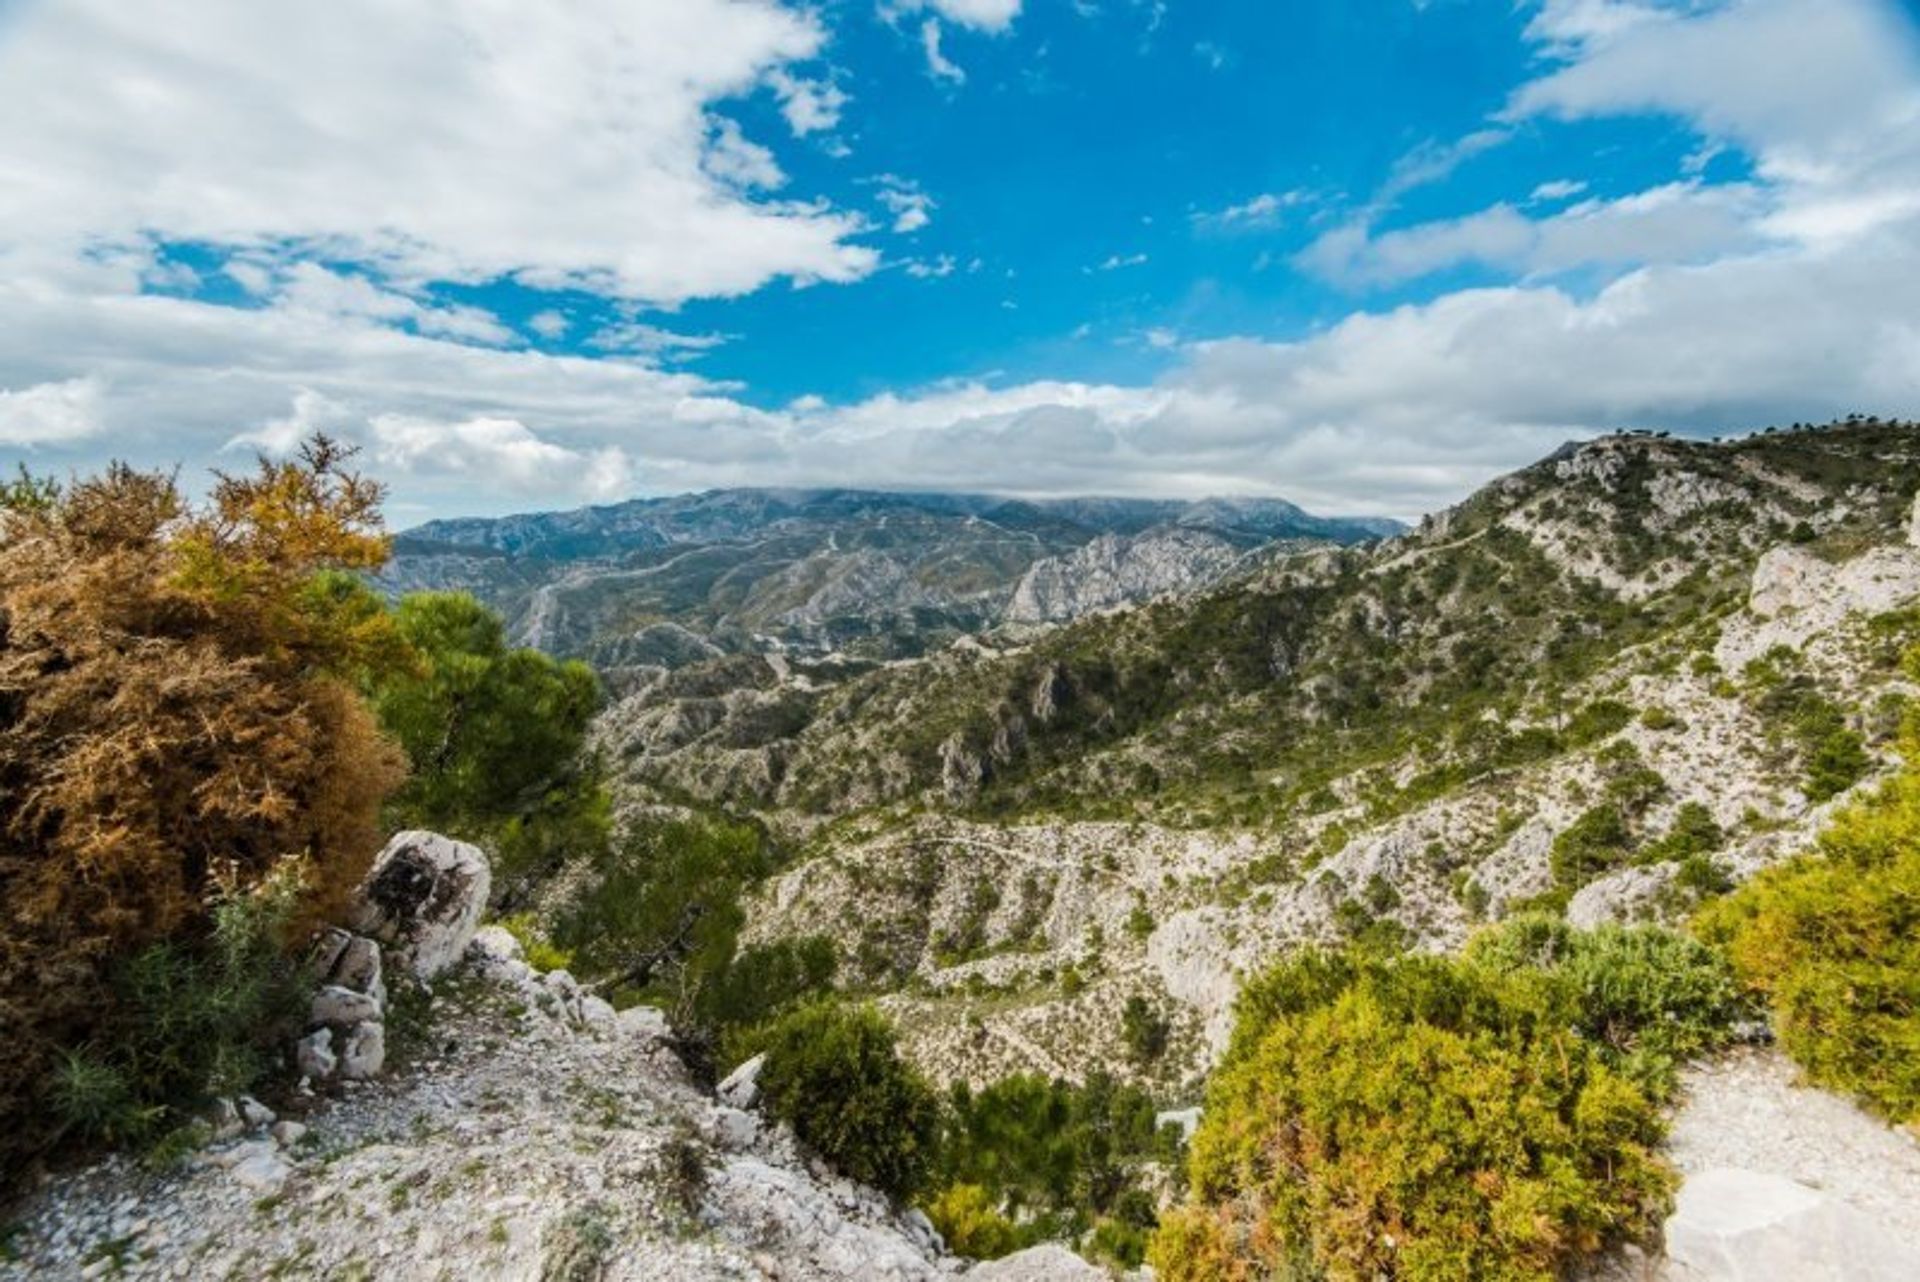 Sierras de Tejeda, Almijara and Alhama Natural Park is an ideal place for hiking, climbing or horseback riding